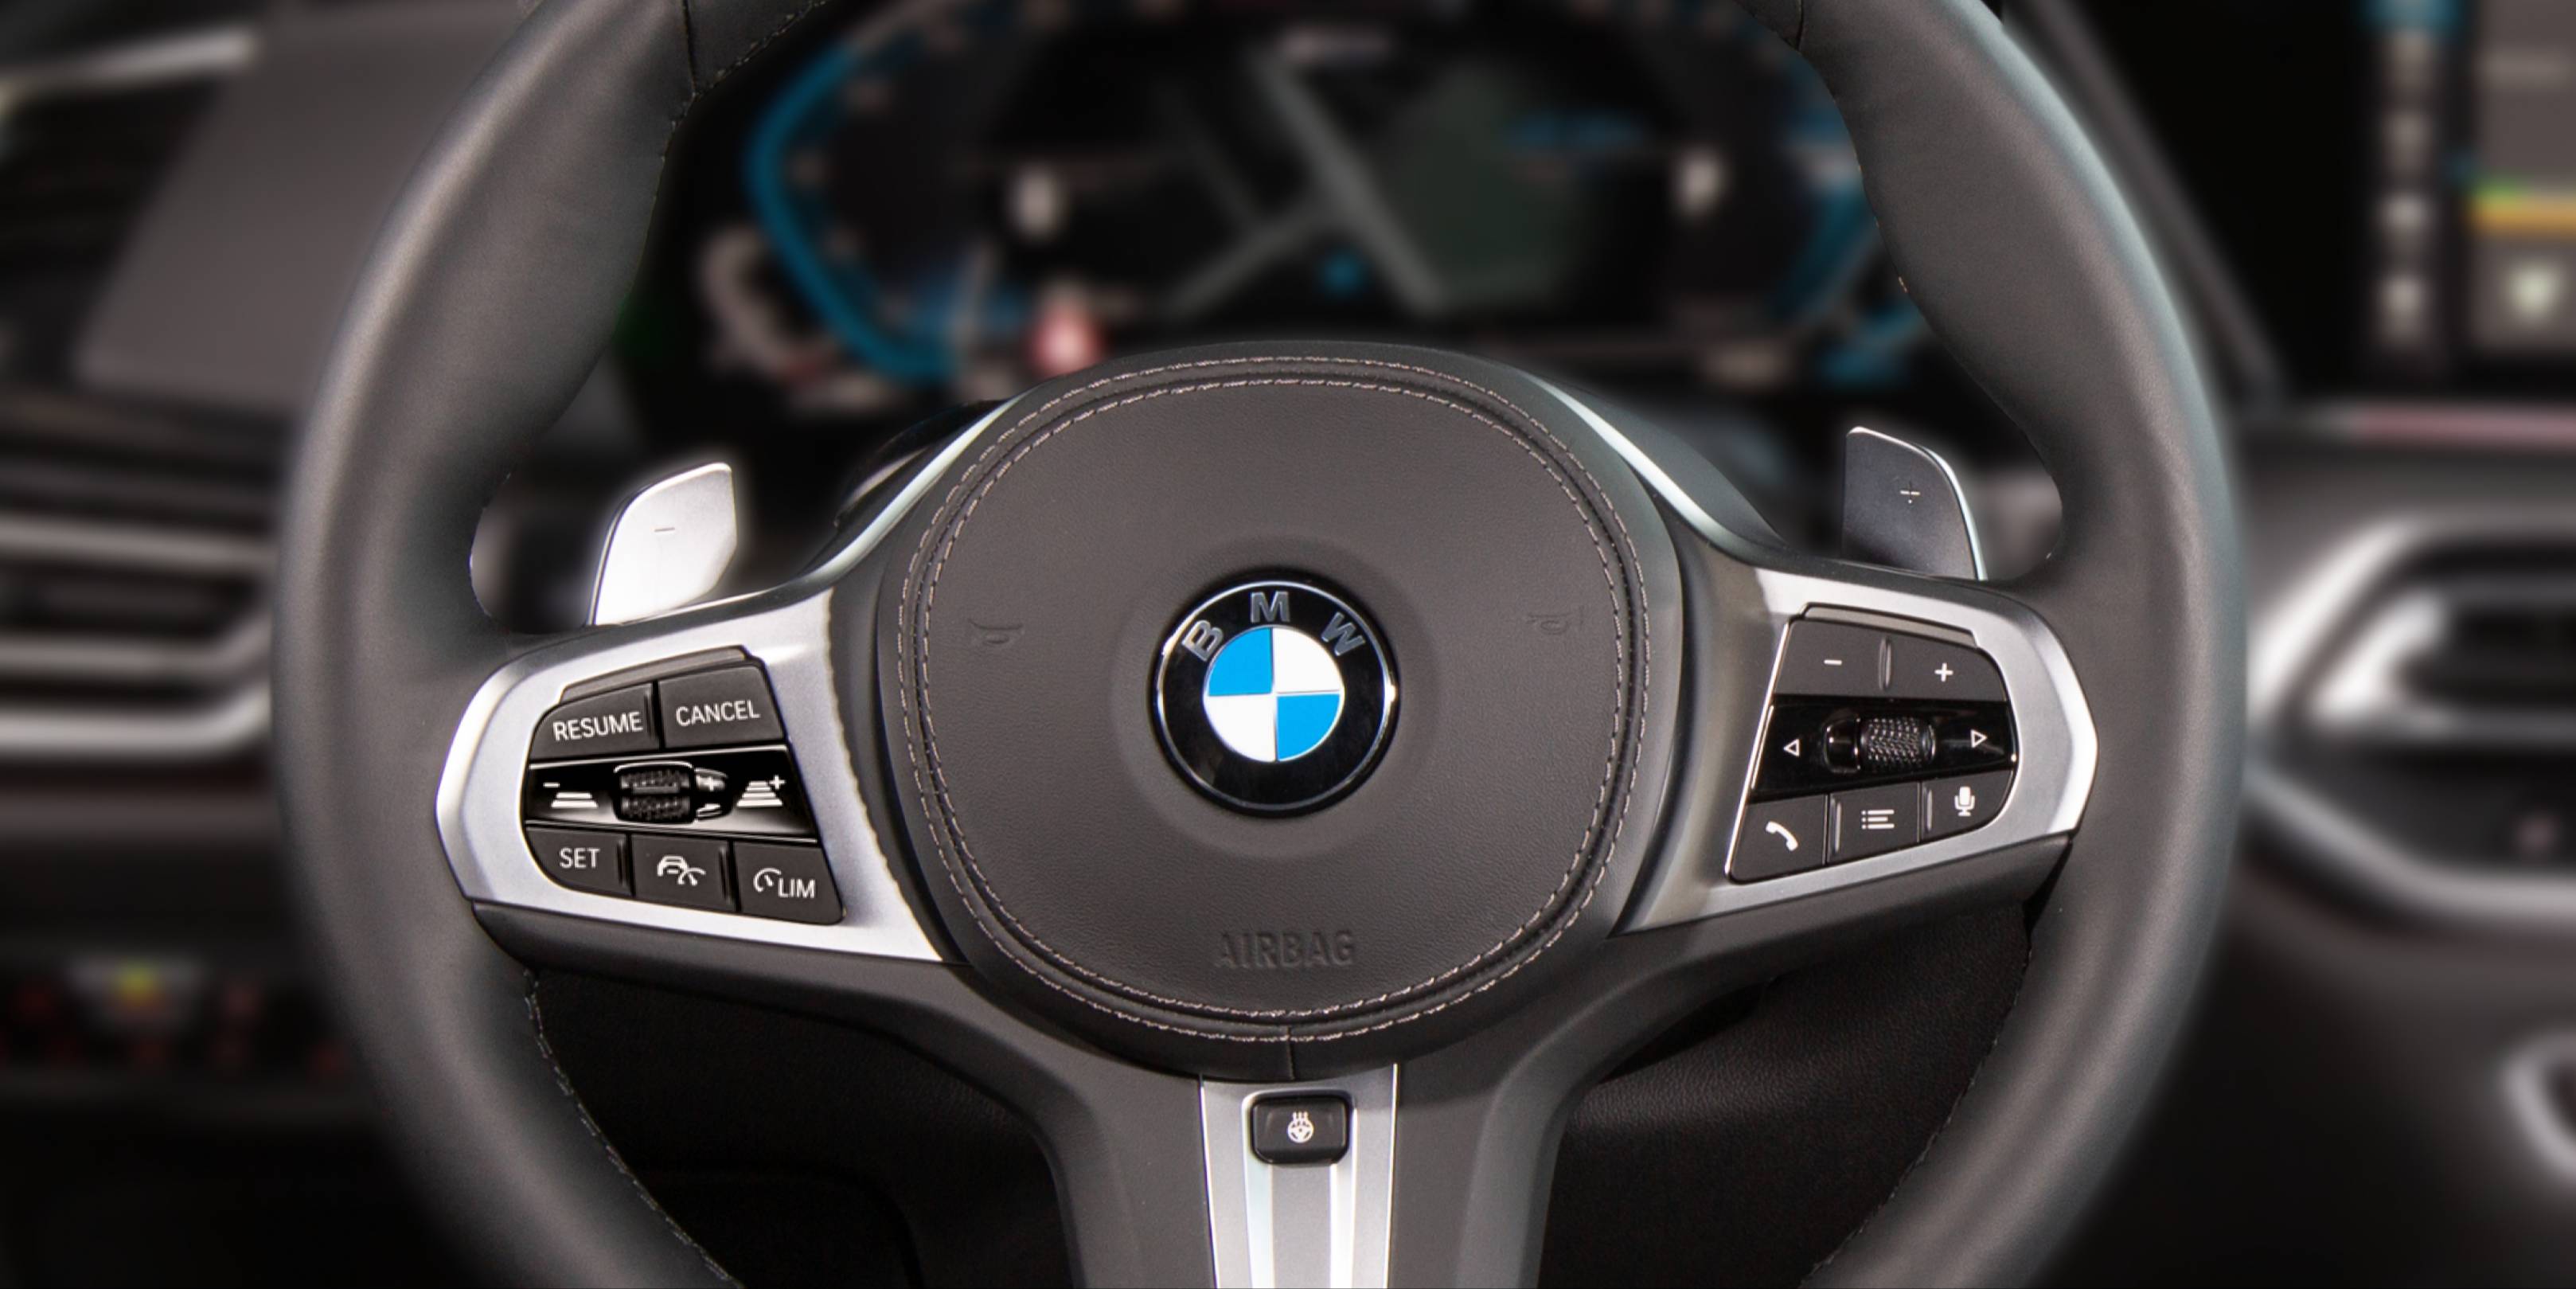 BMW steering wheel: Buttons Explained